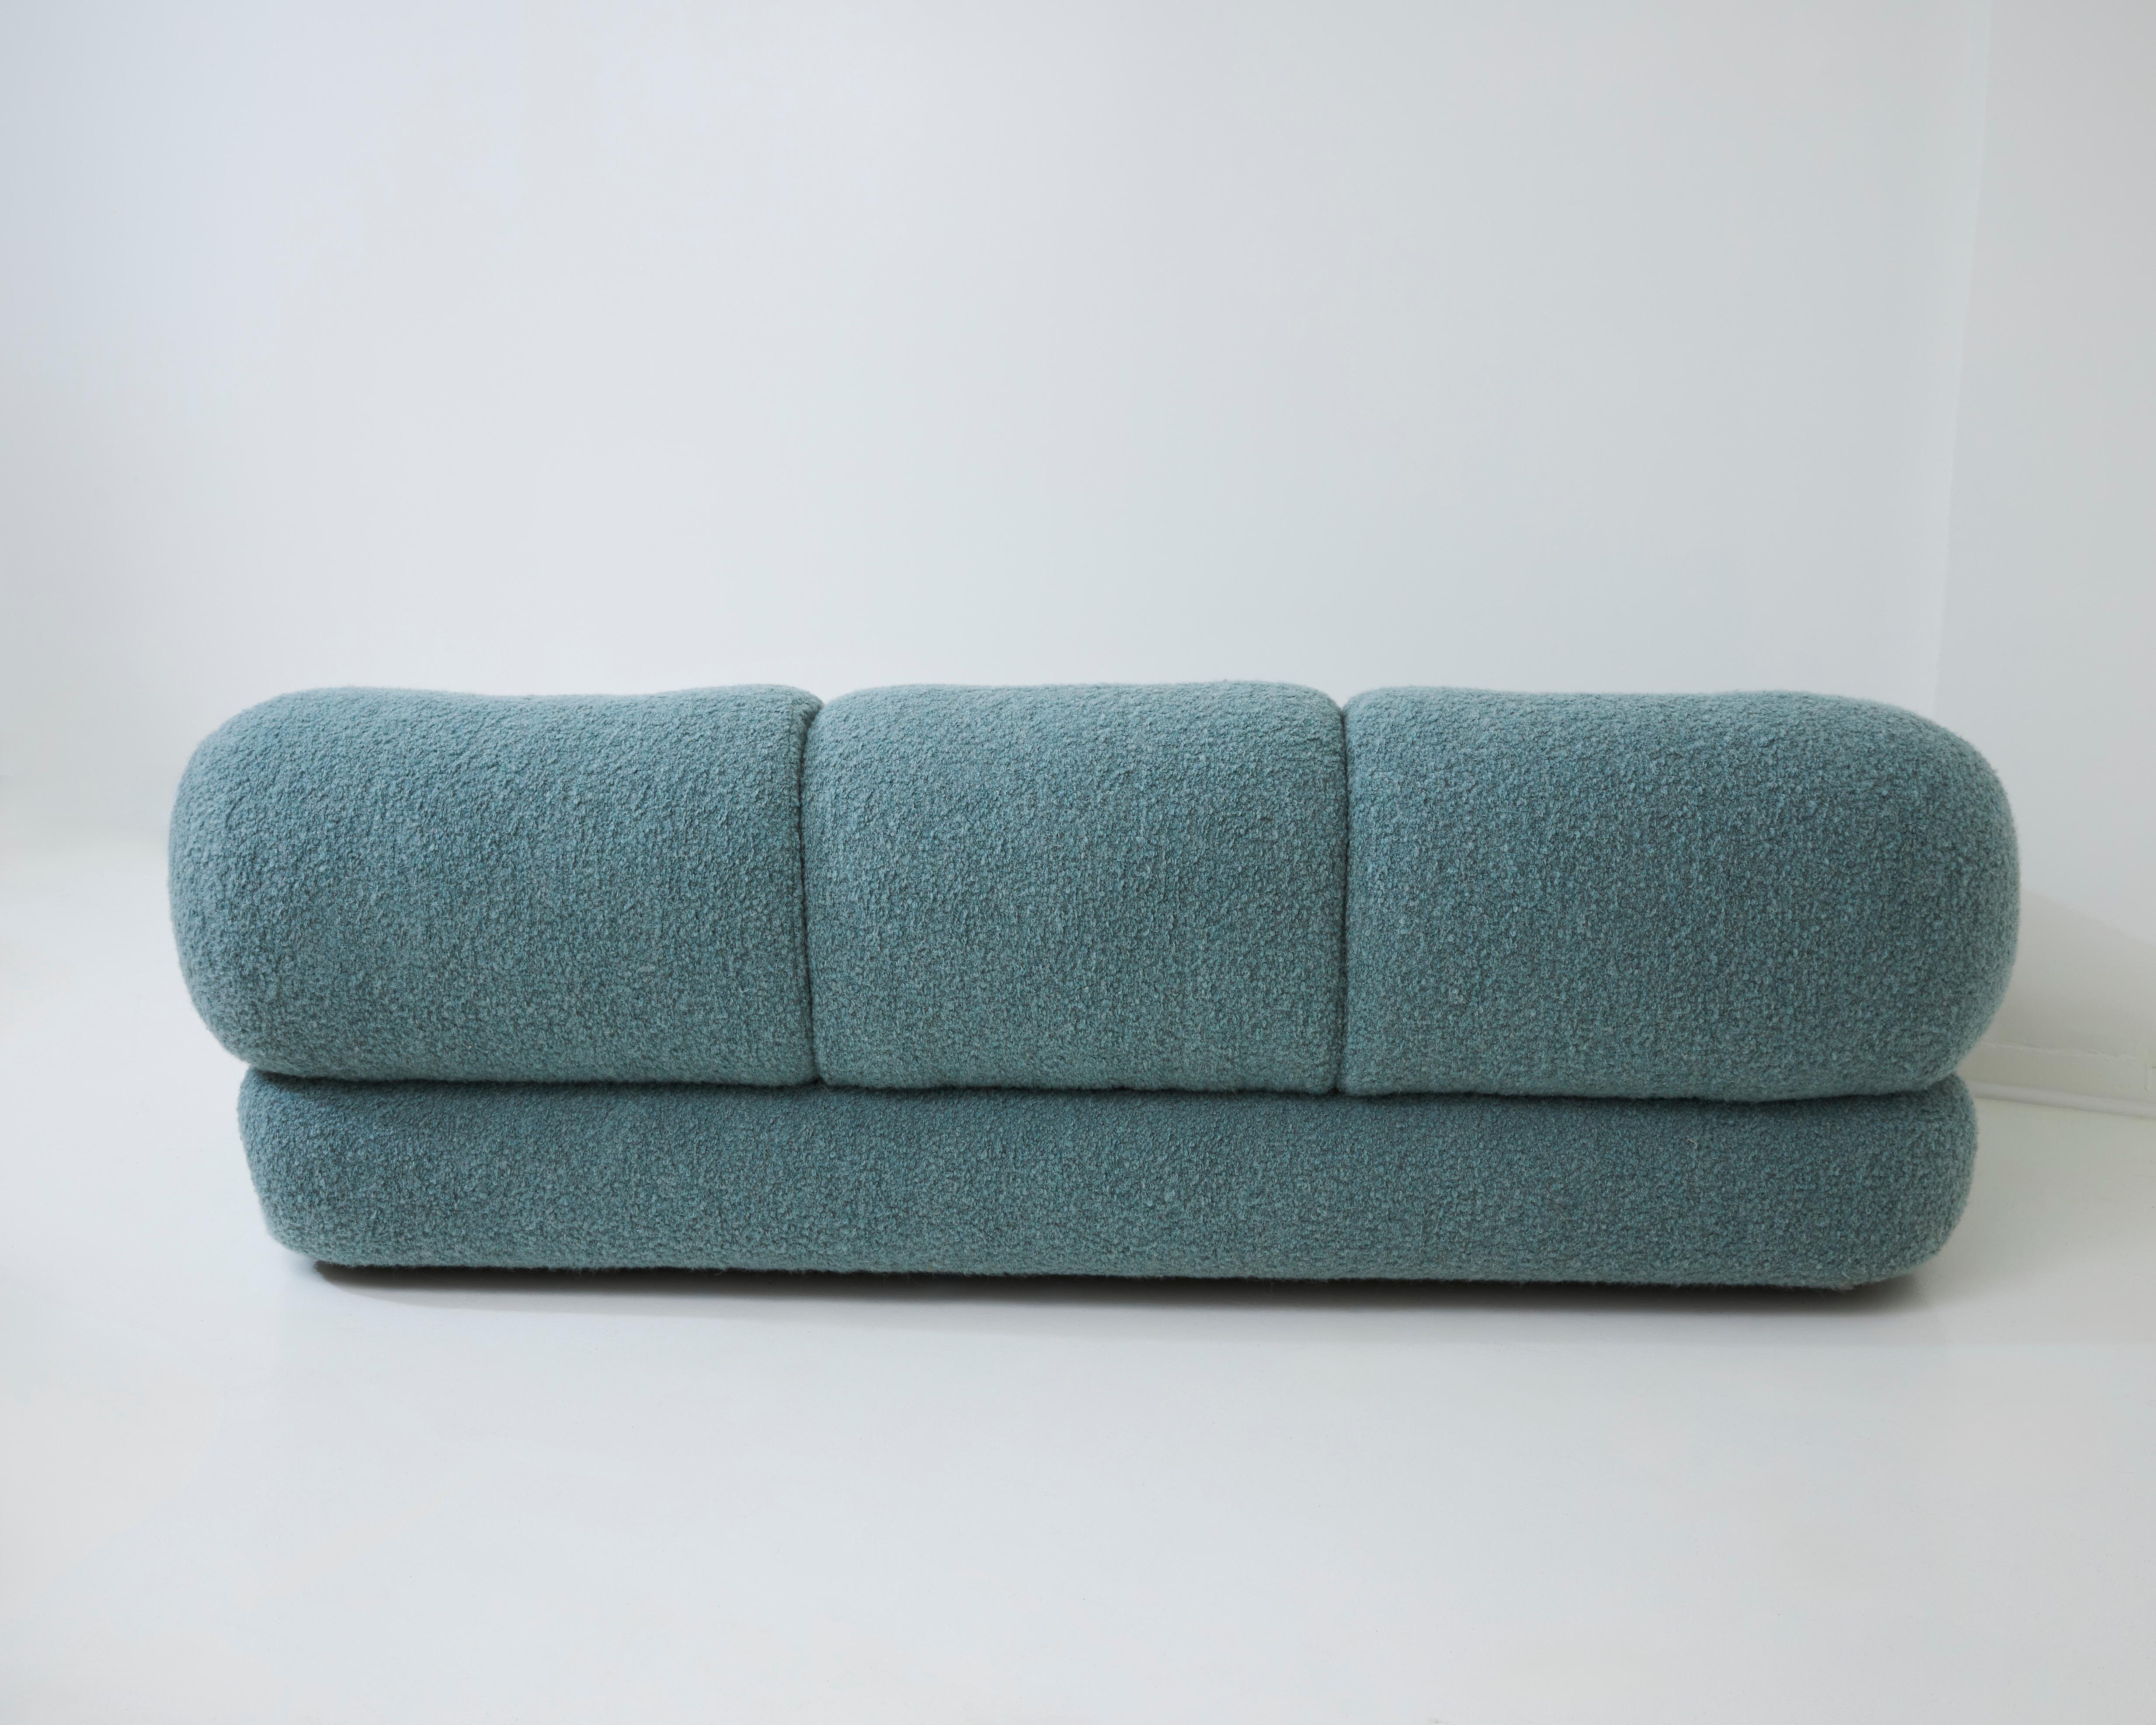 A spacious lounge sofa designed by Sapporo for Mobil Girgi in Italy during the 1970s. This large and stylish sofa boasts fluffy cushions and inviting round shapes that beckon you to sit back and unwind. Designed with comfort in mind, it features